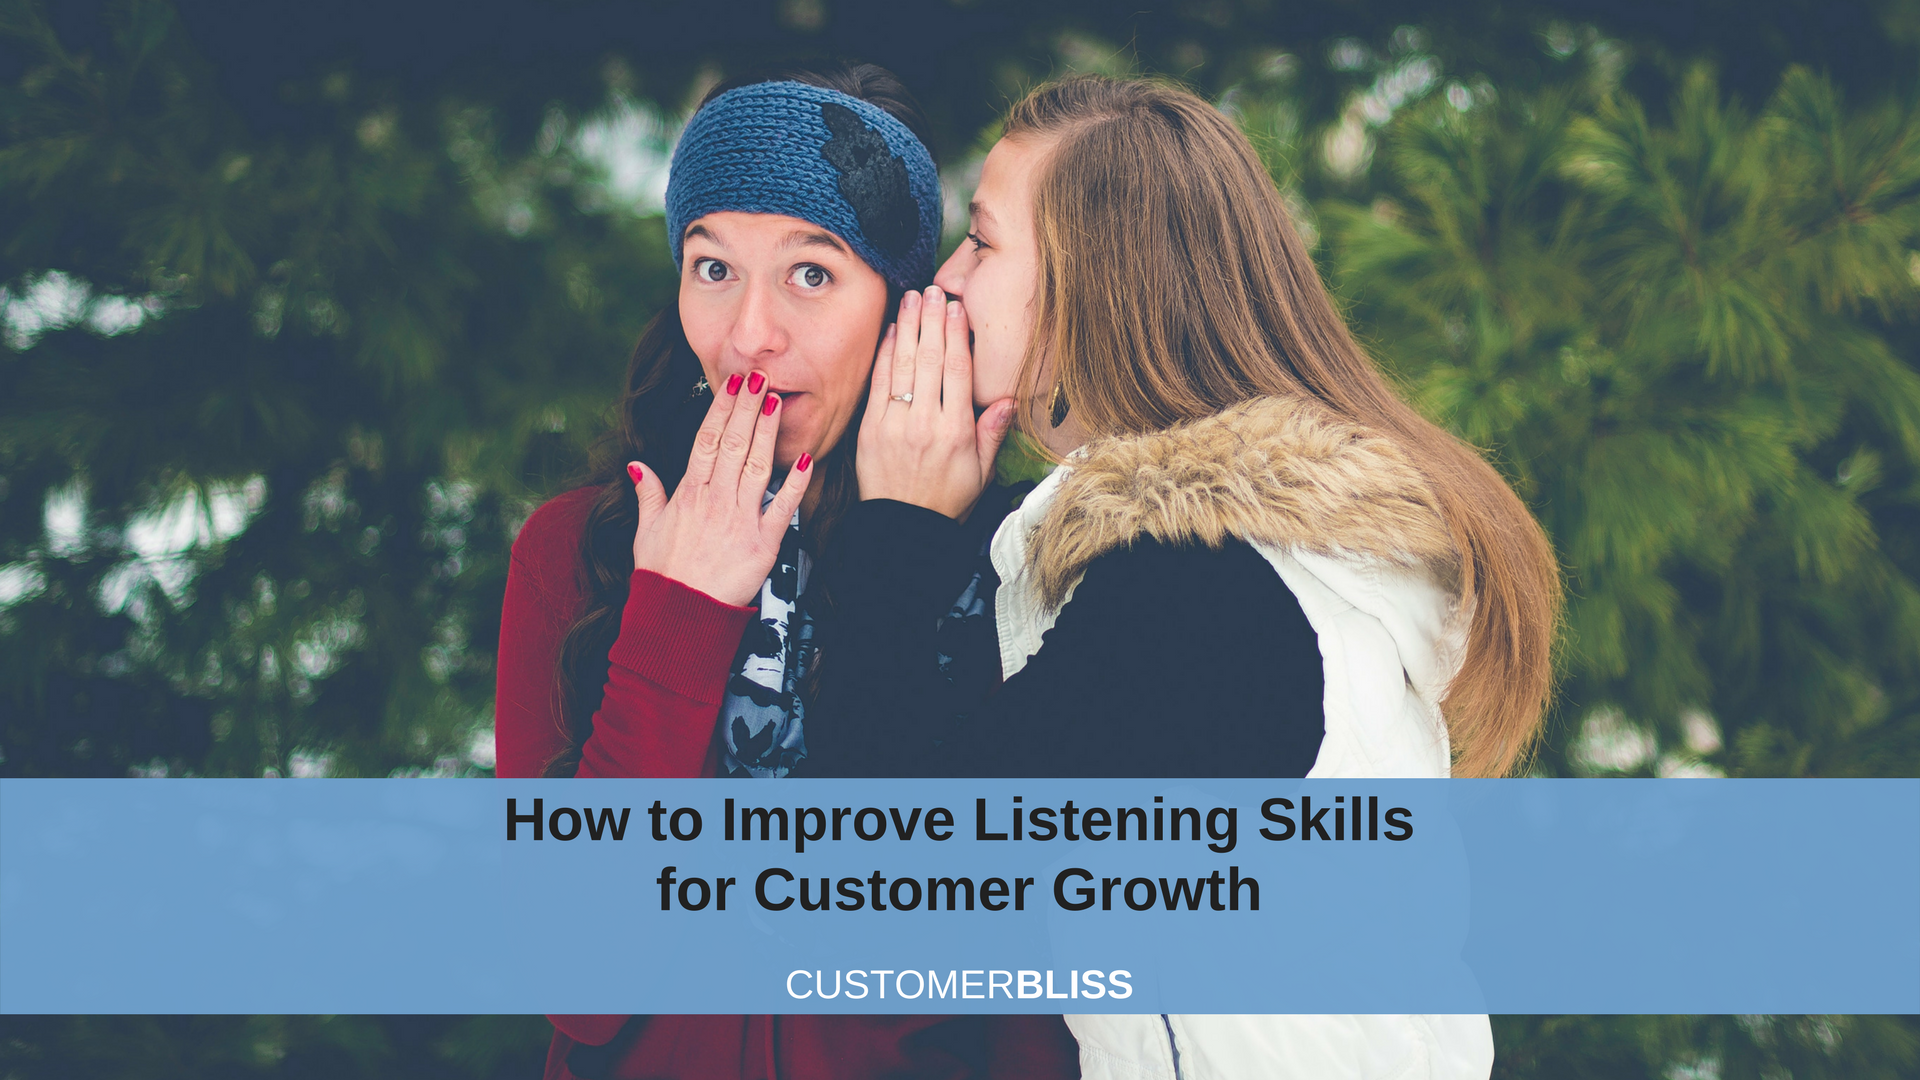 How to Improve Listening Skills for Customer Growth